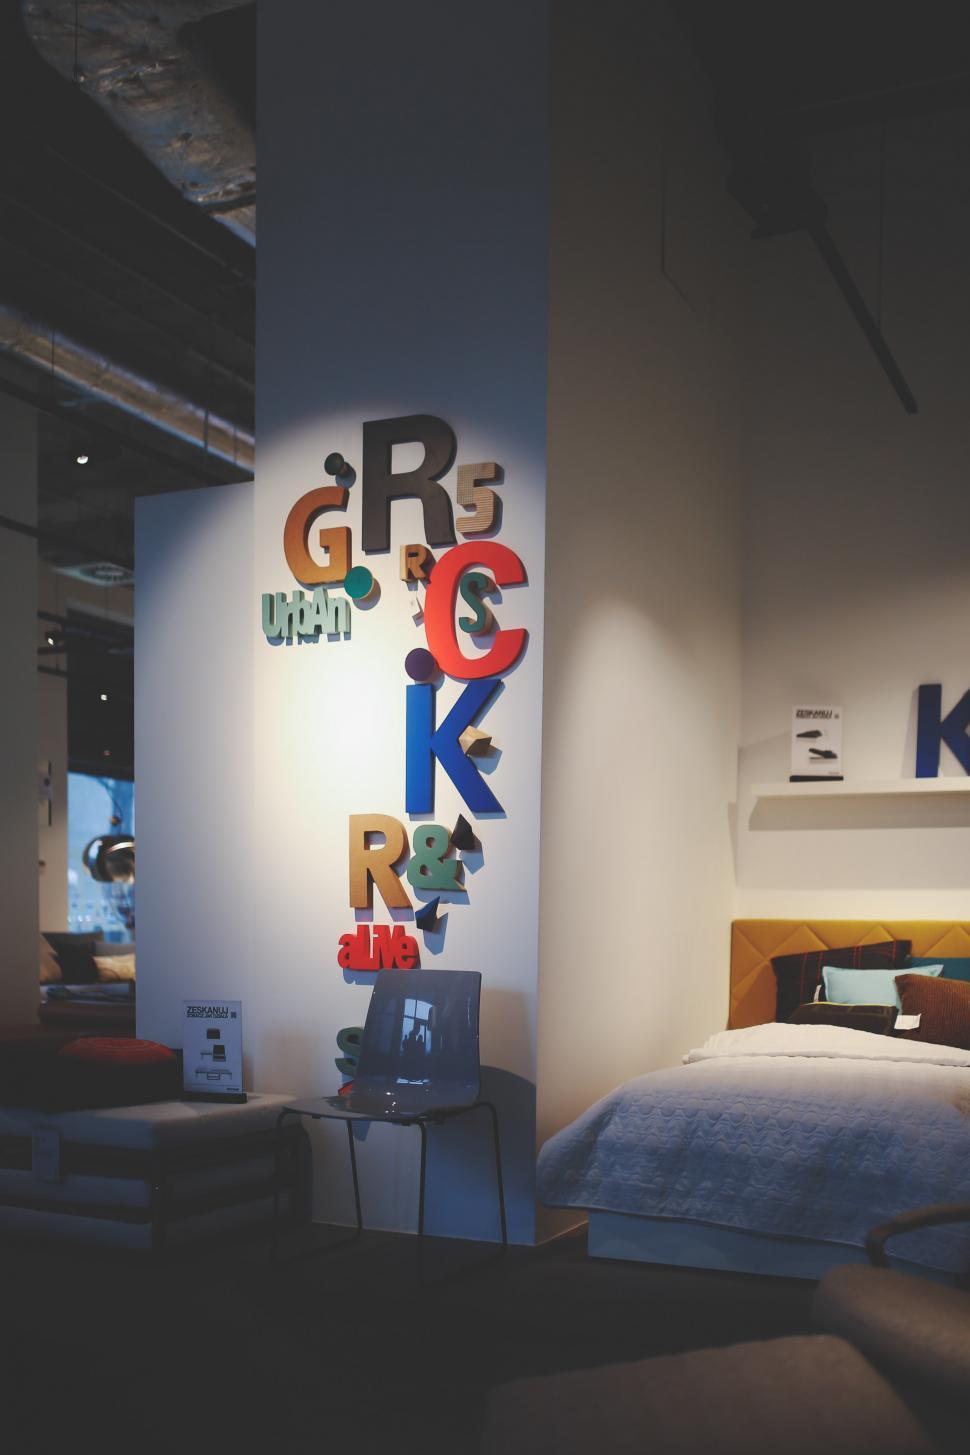 Free Image of Bed in Room With Wall Letters 